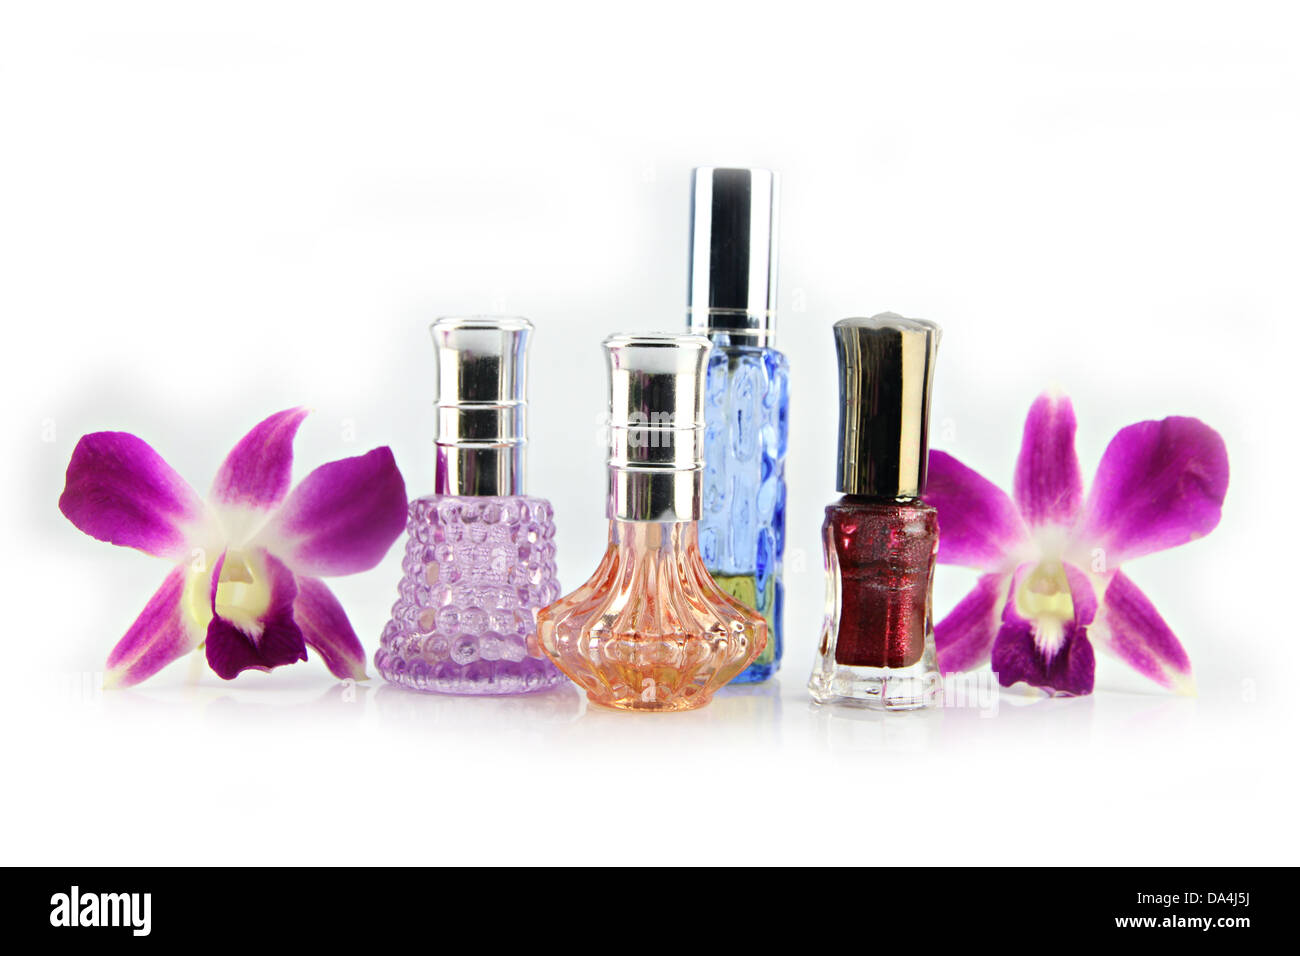 The Purple orchid and Perfume bottles on the white background. Stock Photo